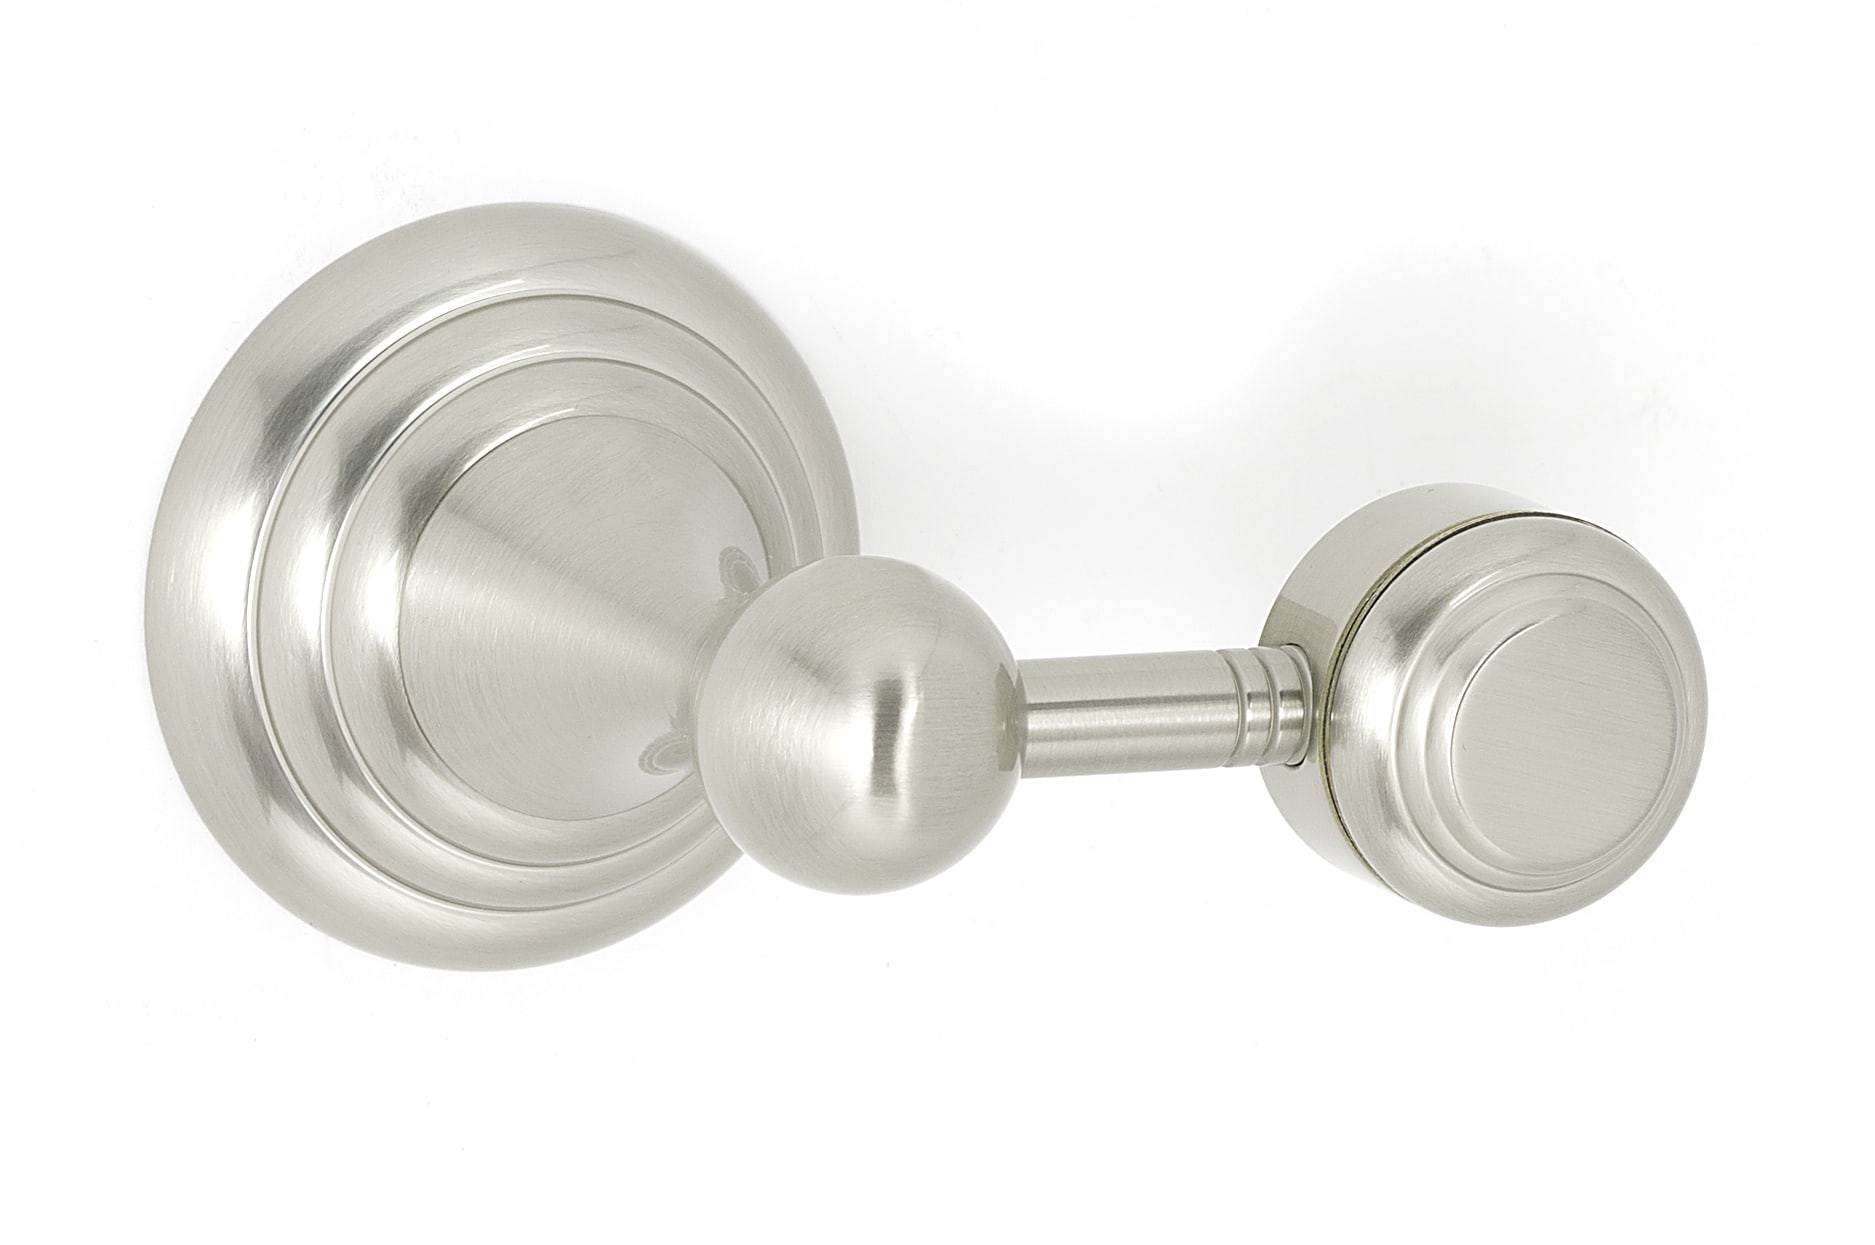 Alno A903-PN Double Robe Hook - Polished Nickel